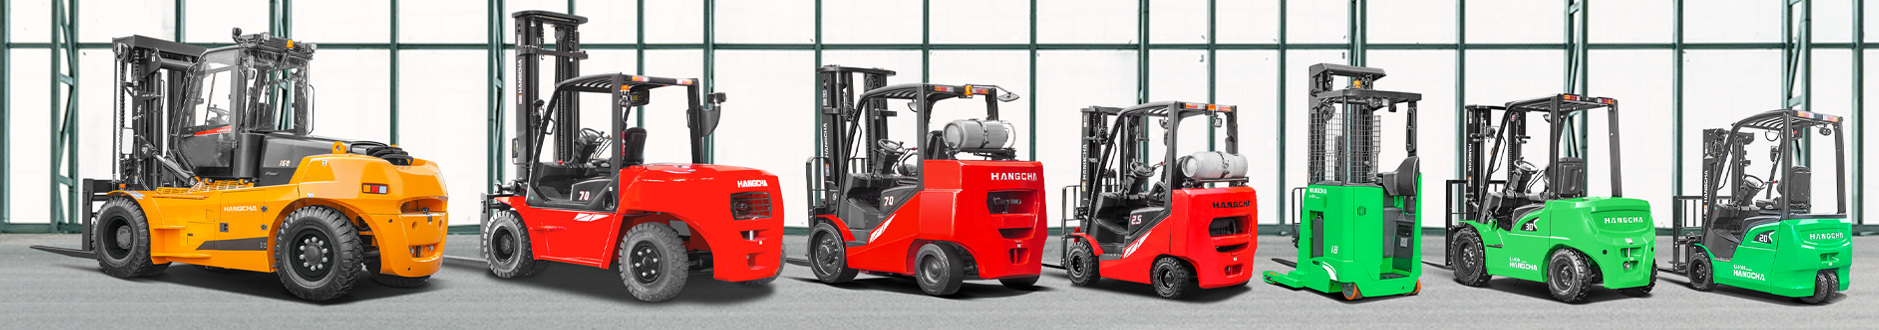 Hangcha-Forklift-Product-Pages-Banner-Hero